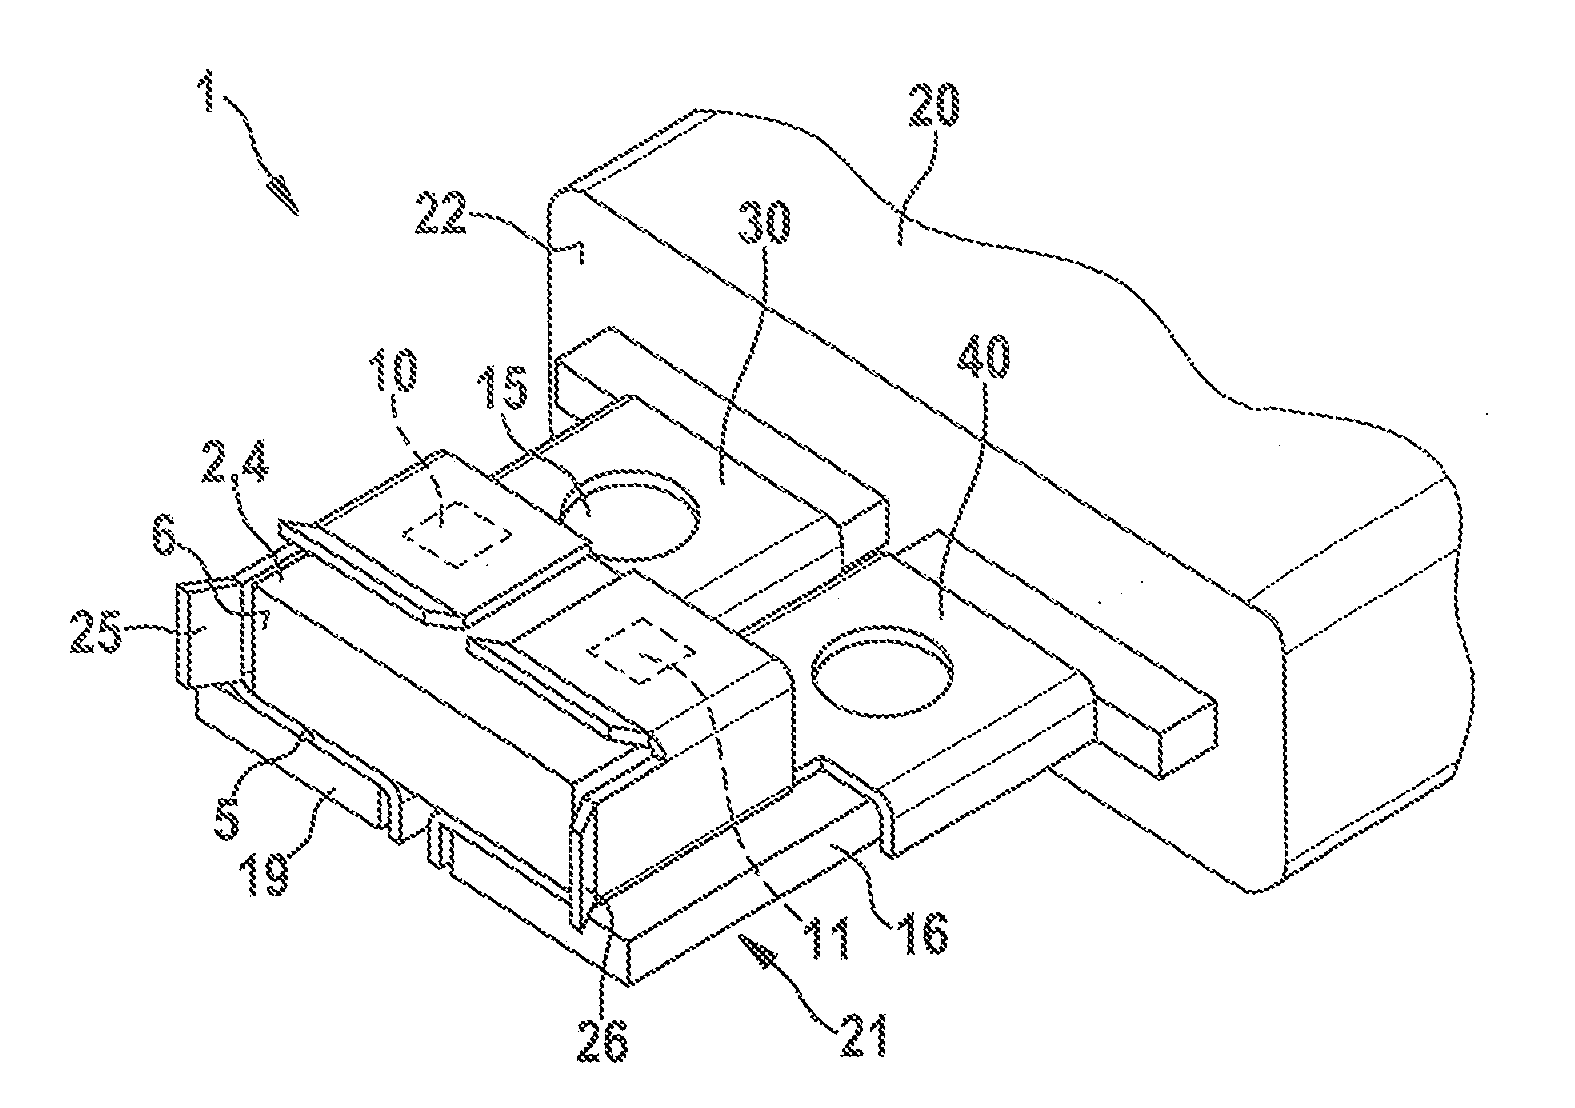 Device for attaching and contacting an electrical component and method for manufacturing the device